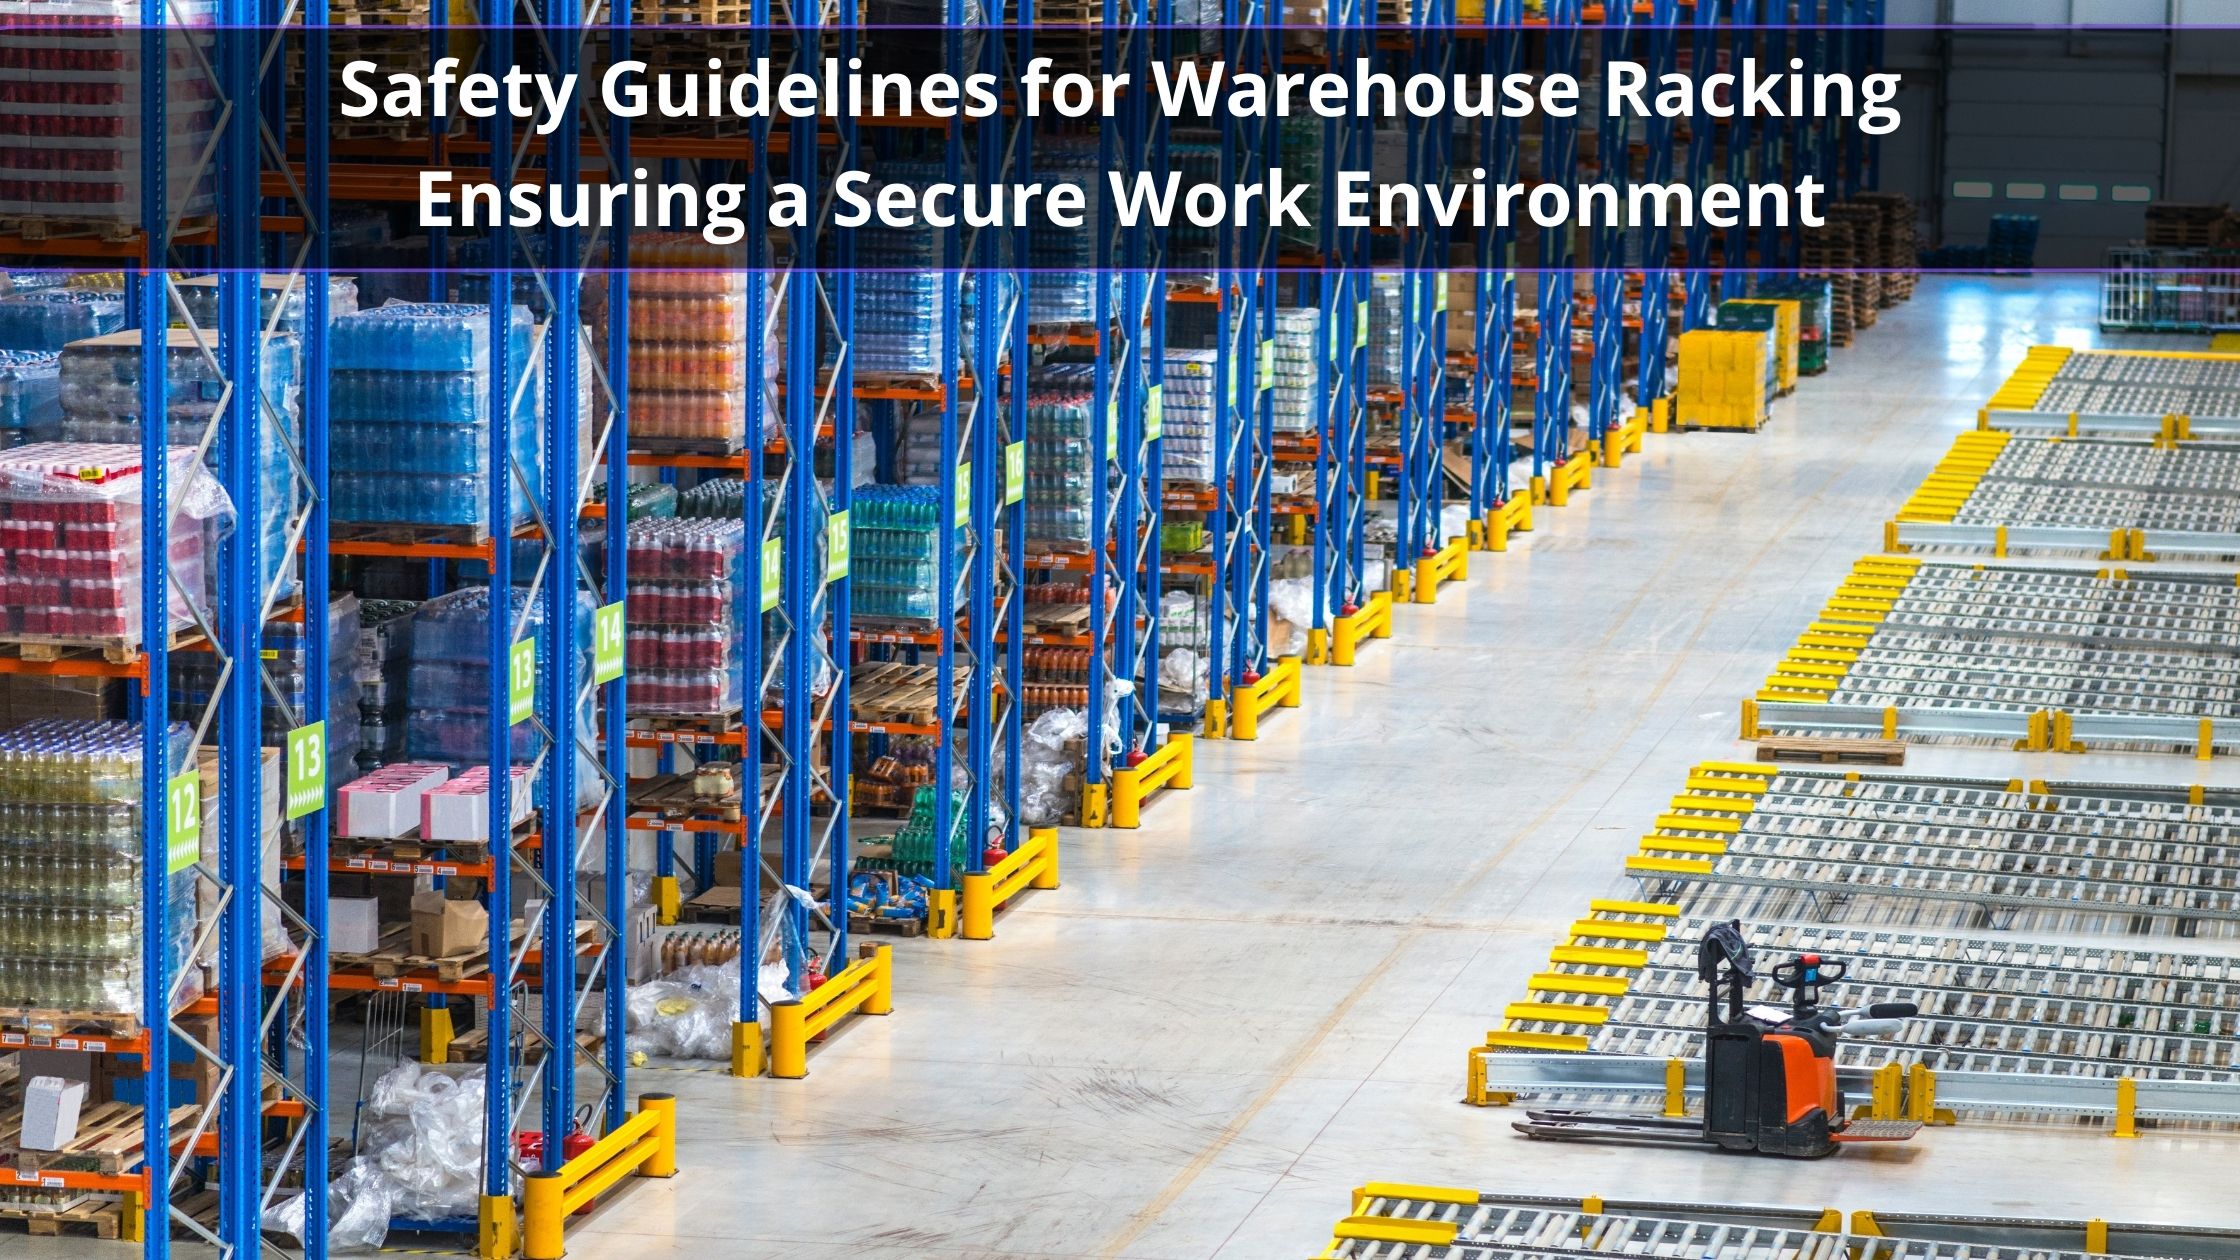 Safety Guidelines for Warehouse Racking: Ensuring a Secure Work Environment